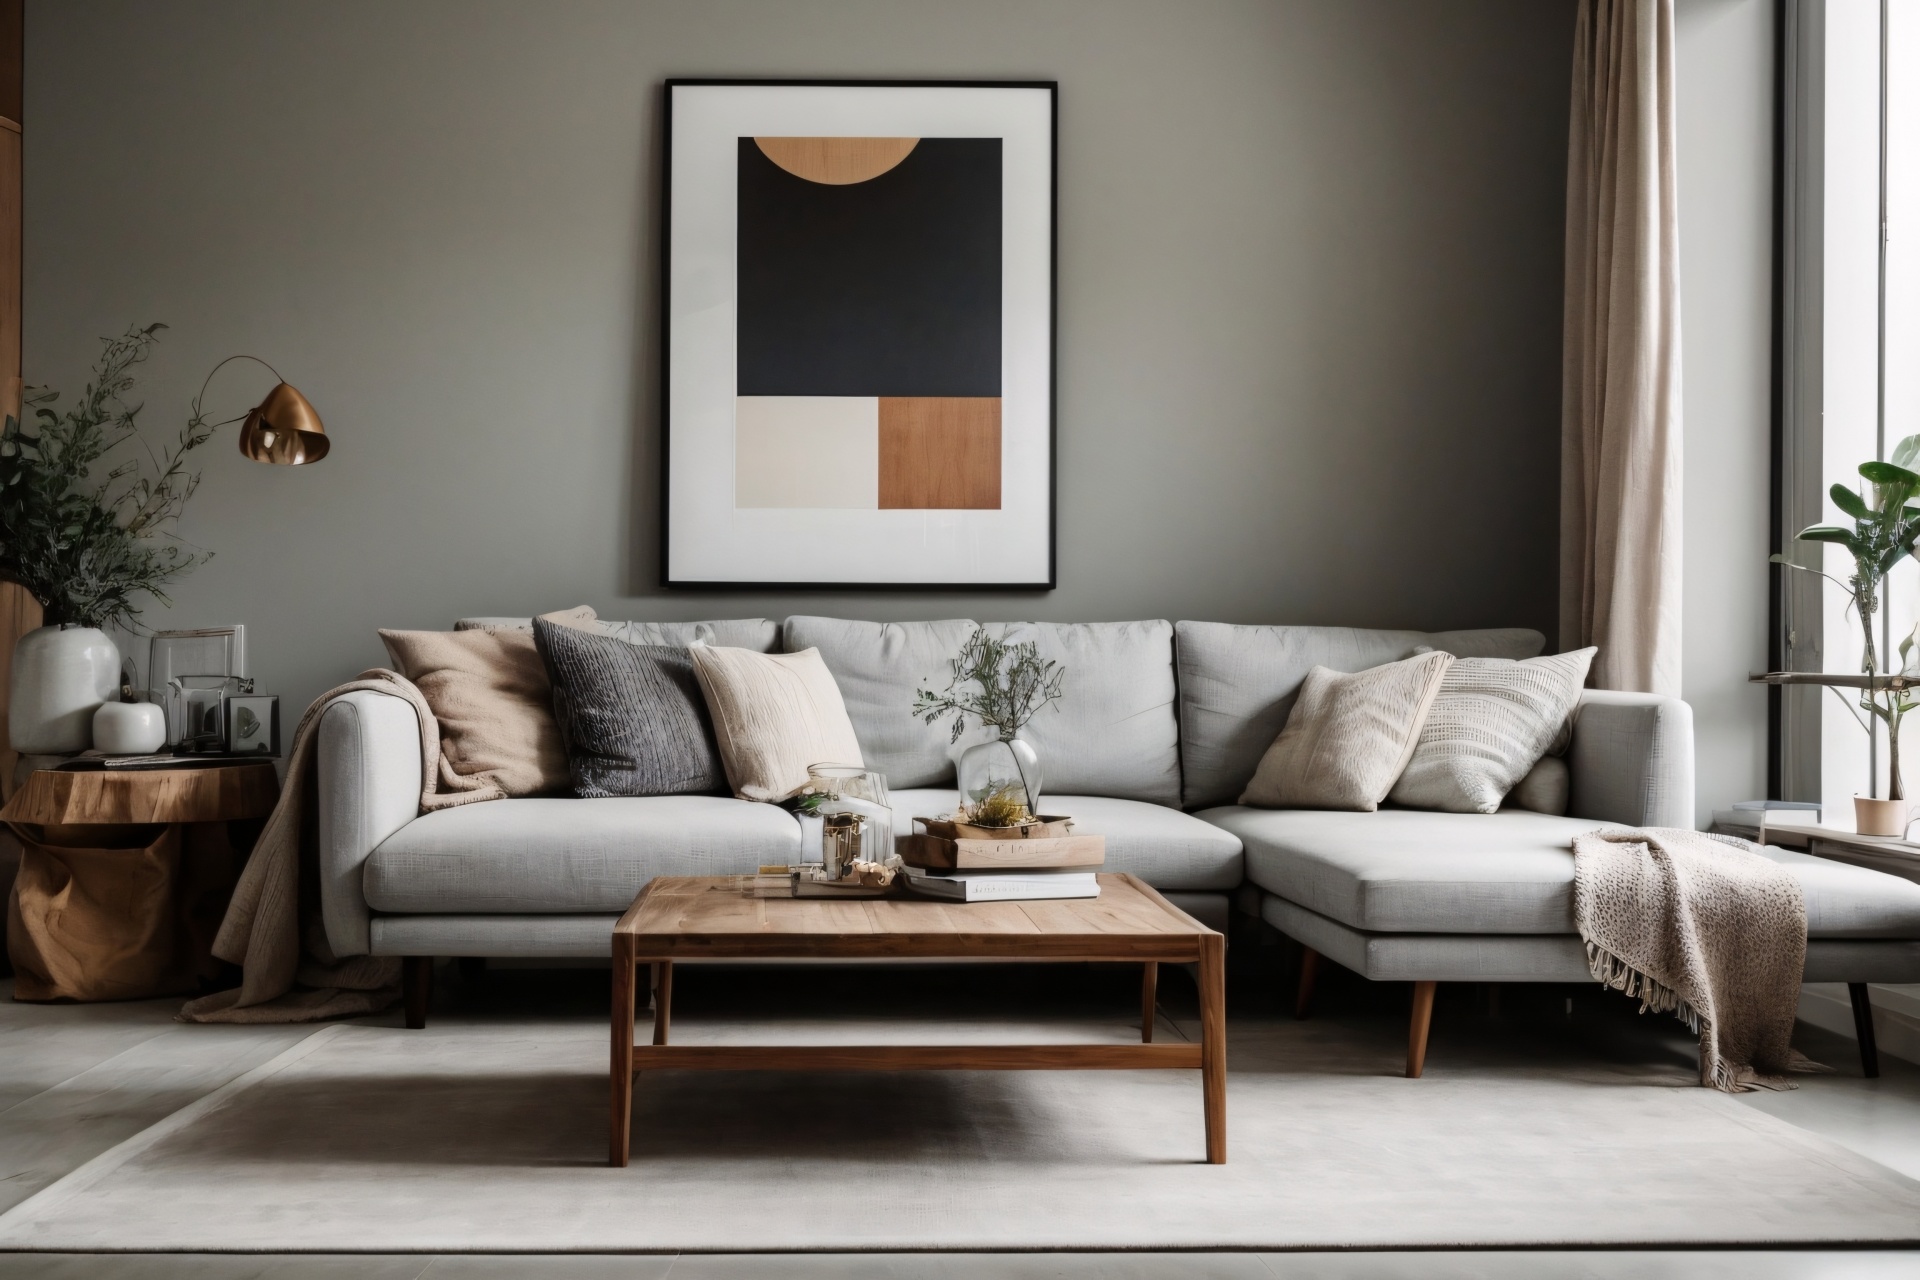 Luxury Interior With A Sofa Free Stock Photo - Public Domain Pictures